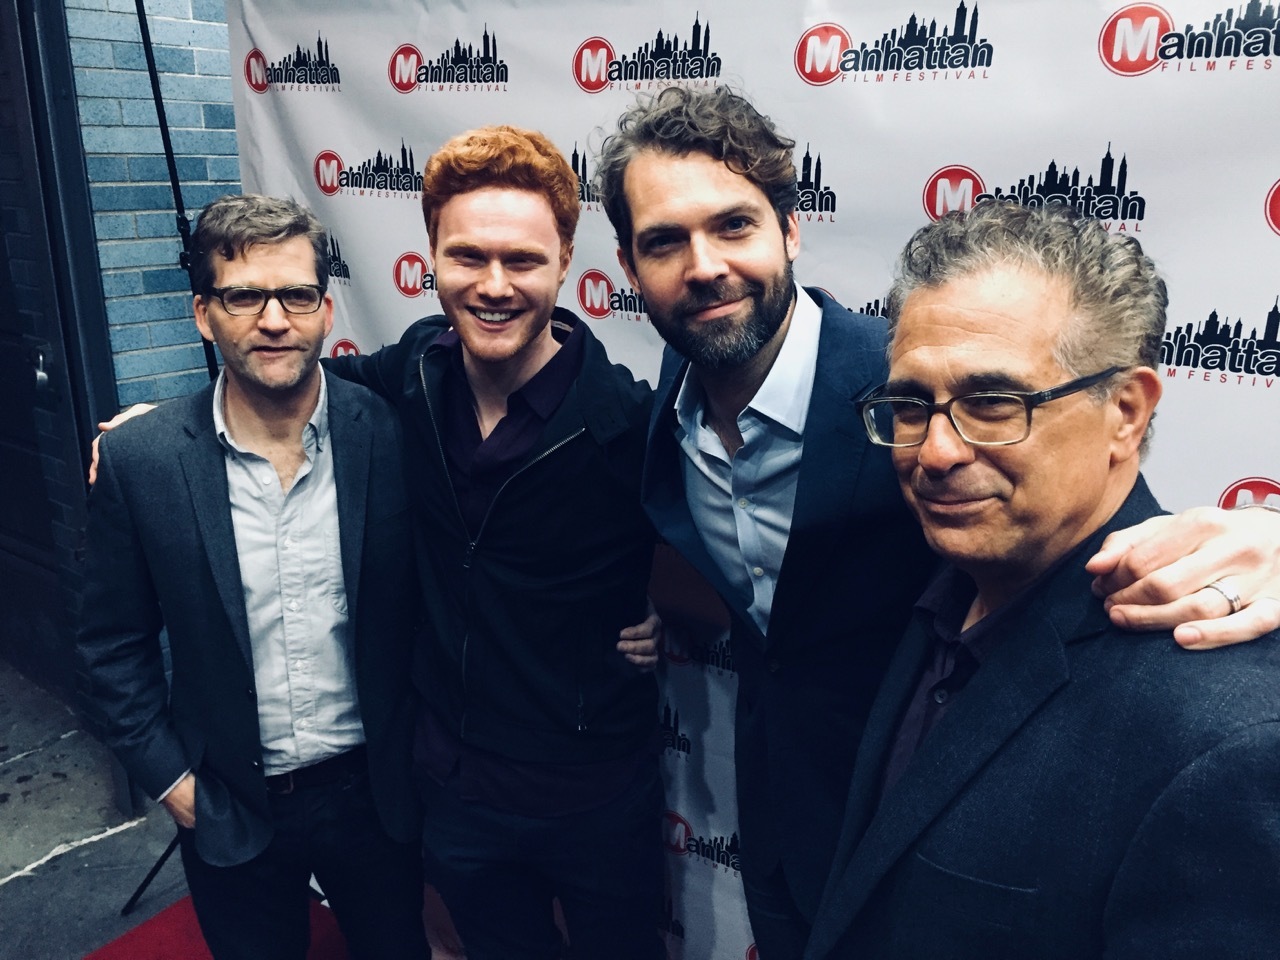 From left, director and co-creator Shannon Goldman, actor Nicholas Barasch, actor Rob Hancock, and writer and co-creator Tony Spiridakis at the Manhattan Film Festival where 